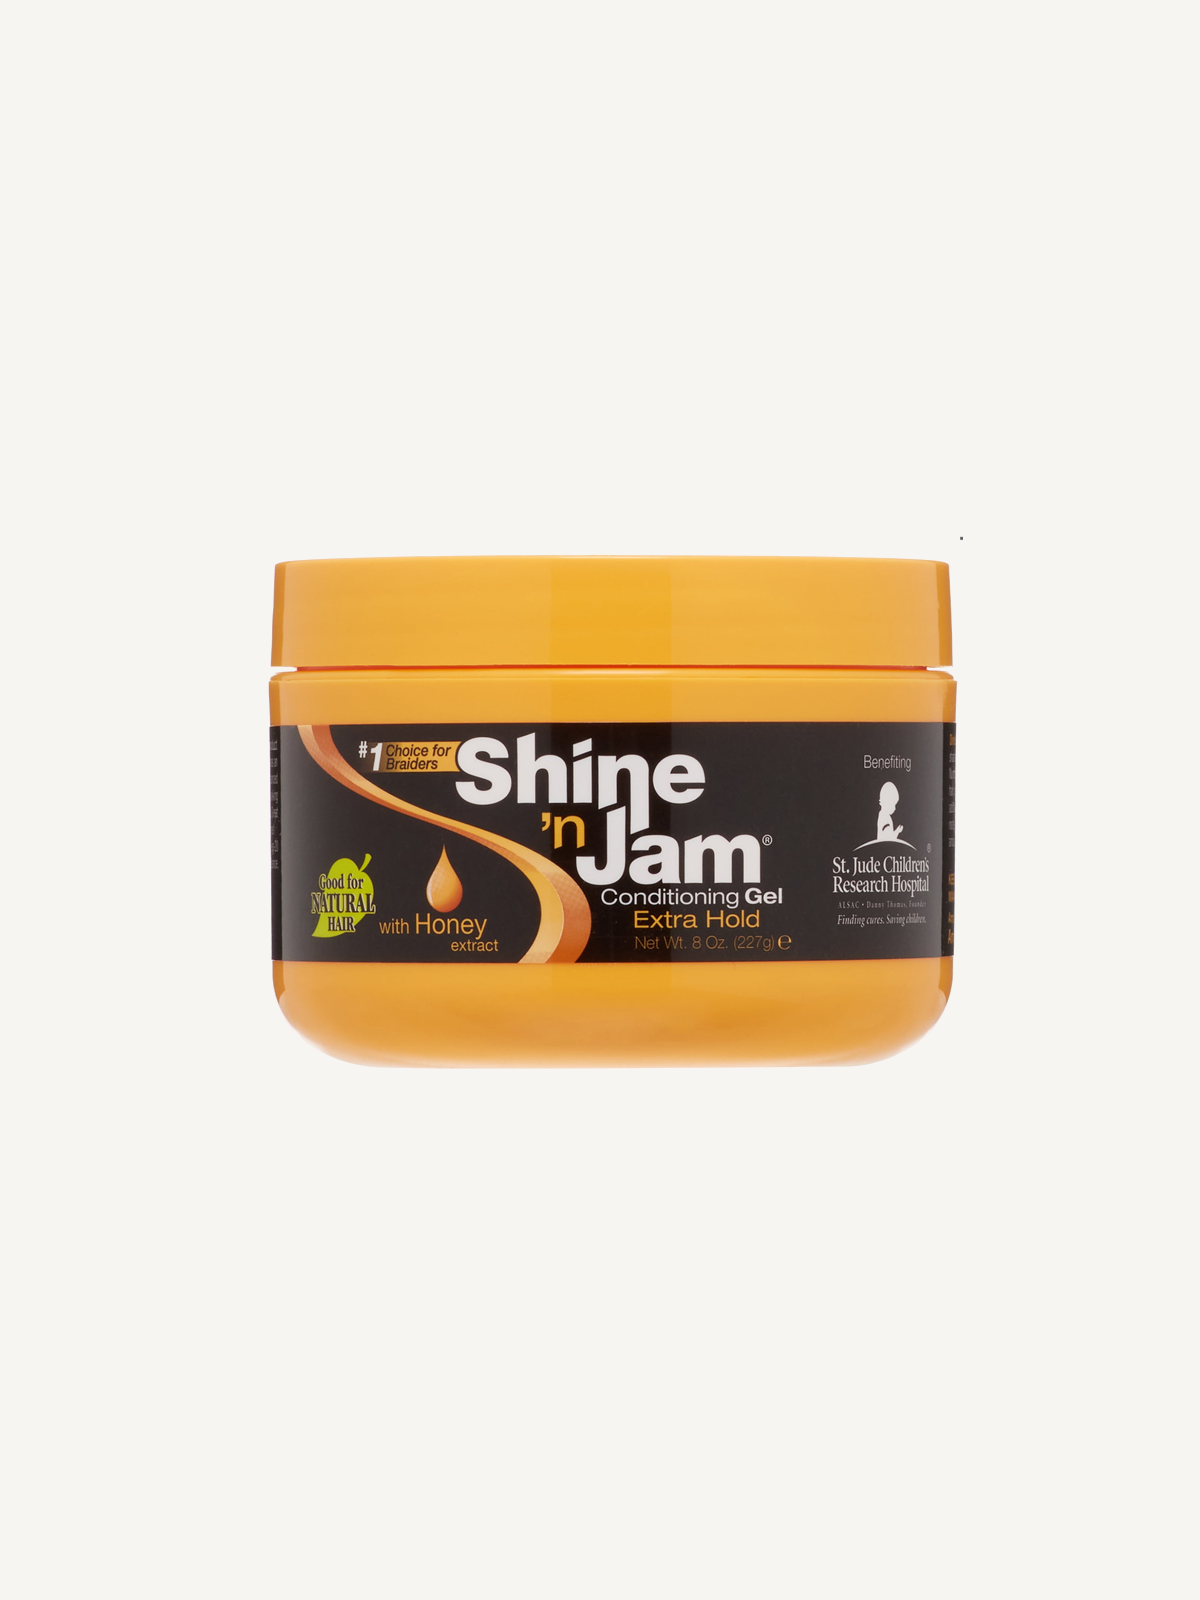 Shine 'n Jam – Extra Hold Conditioning Gel